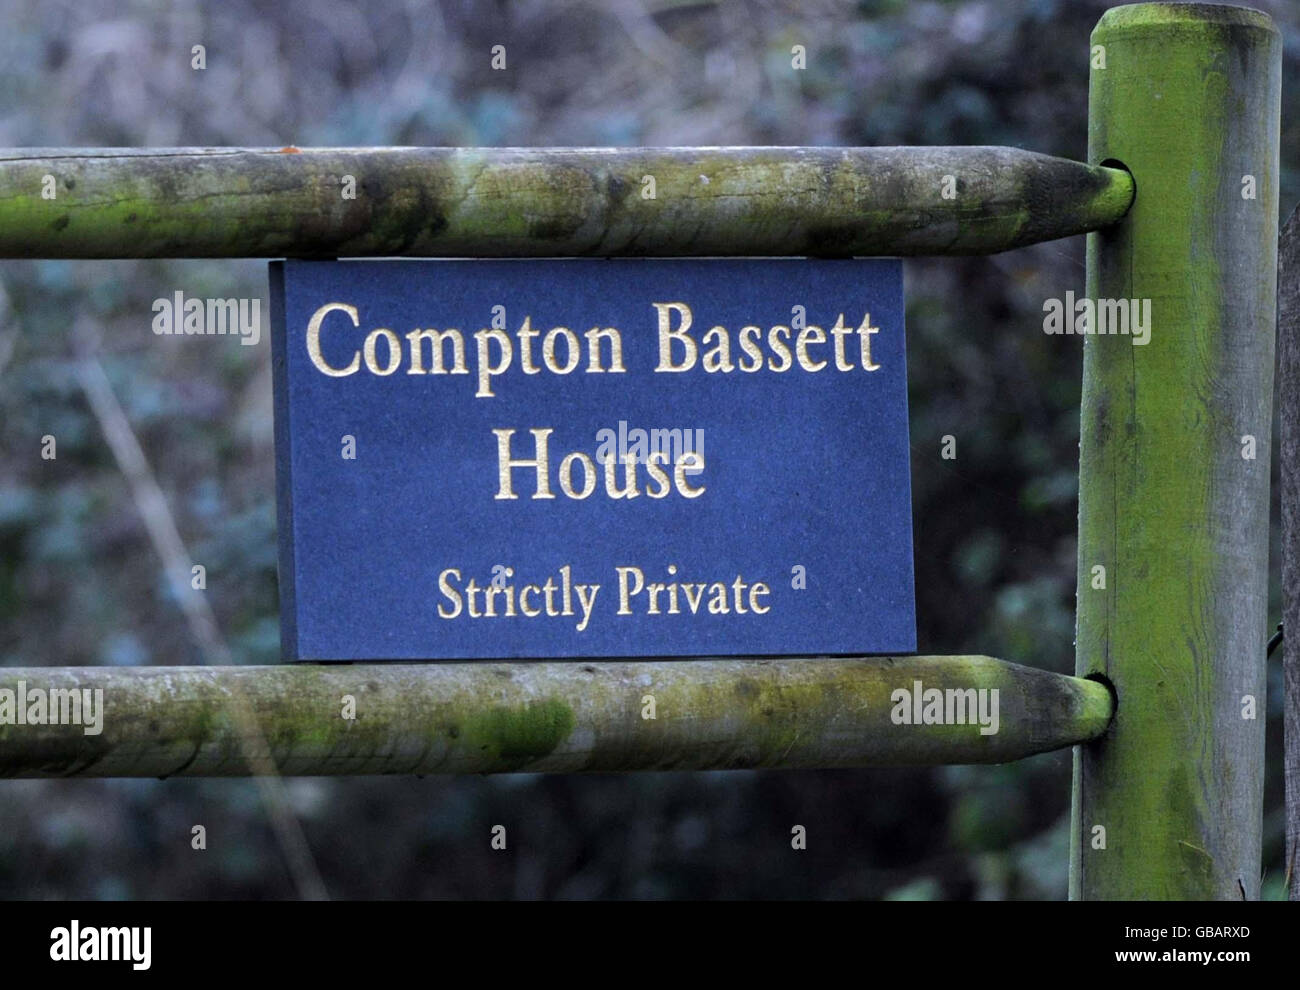 Compton Bassett House in Compton Bassett, Wiltshire which is rumoured to the new home of Robbie Williams. PRESS ASOCIATION PHOTO. Picture date: Friday December 12, 2008. Photo credit should read: Barry Batchelor/PA Wire Stock Photo